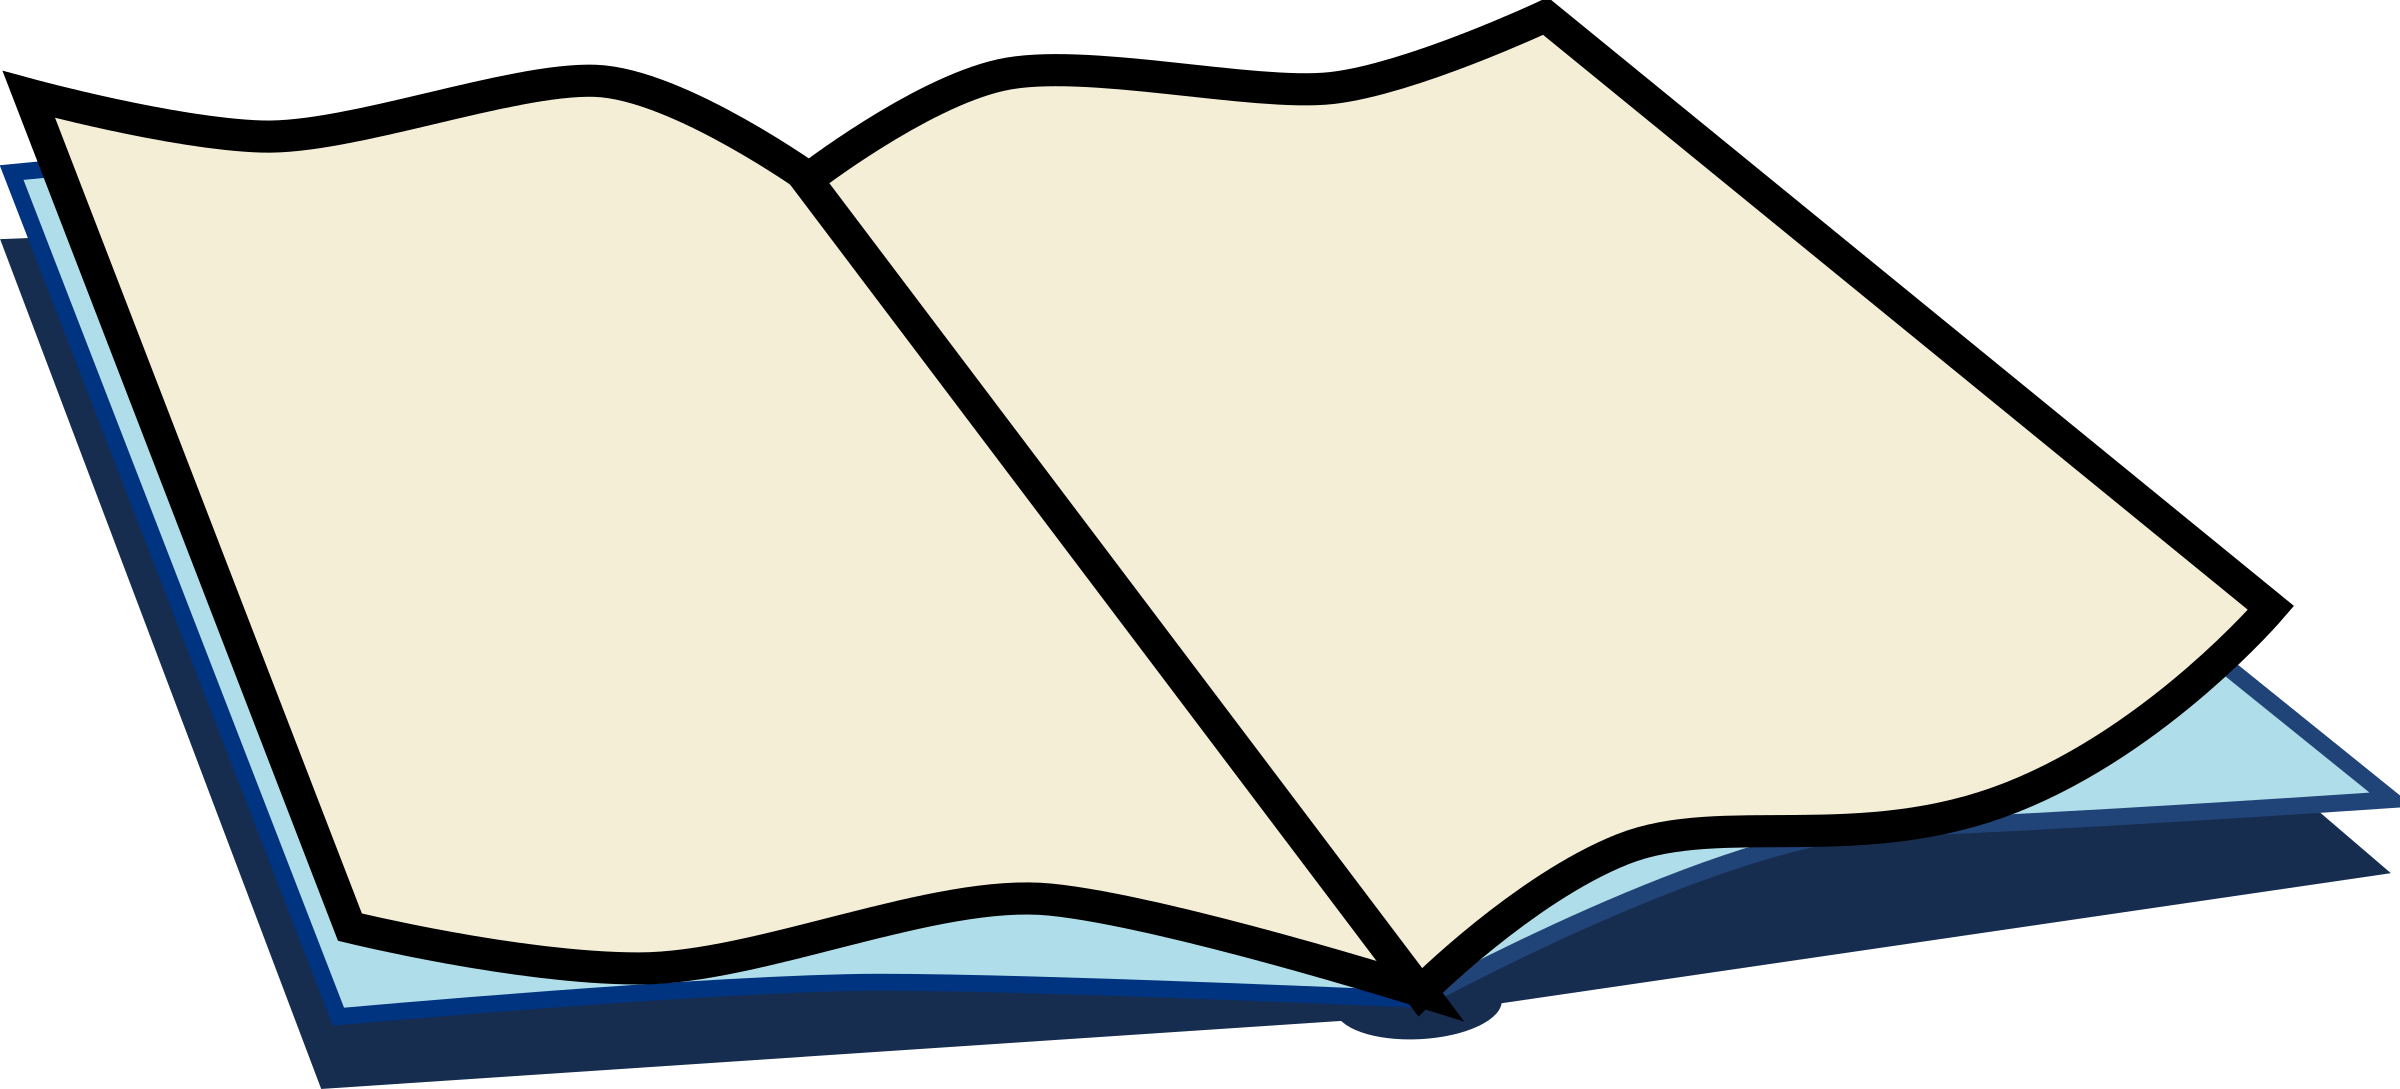 Image png. Big clipart open book